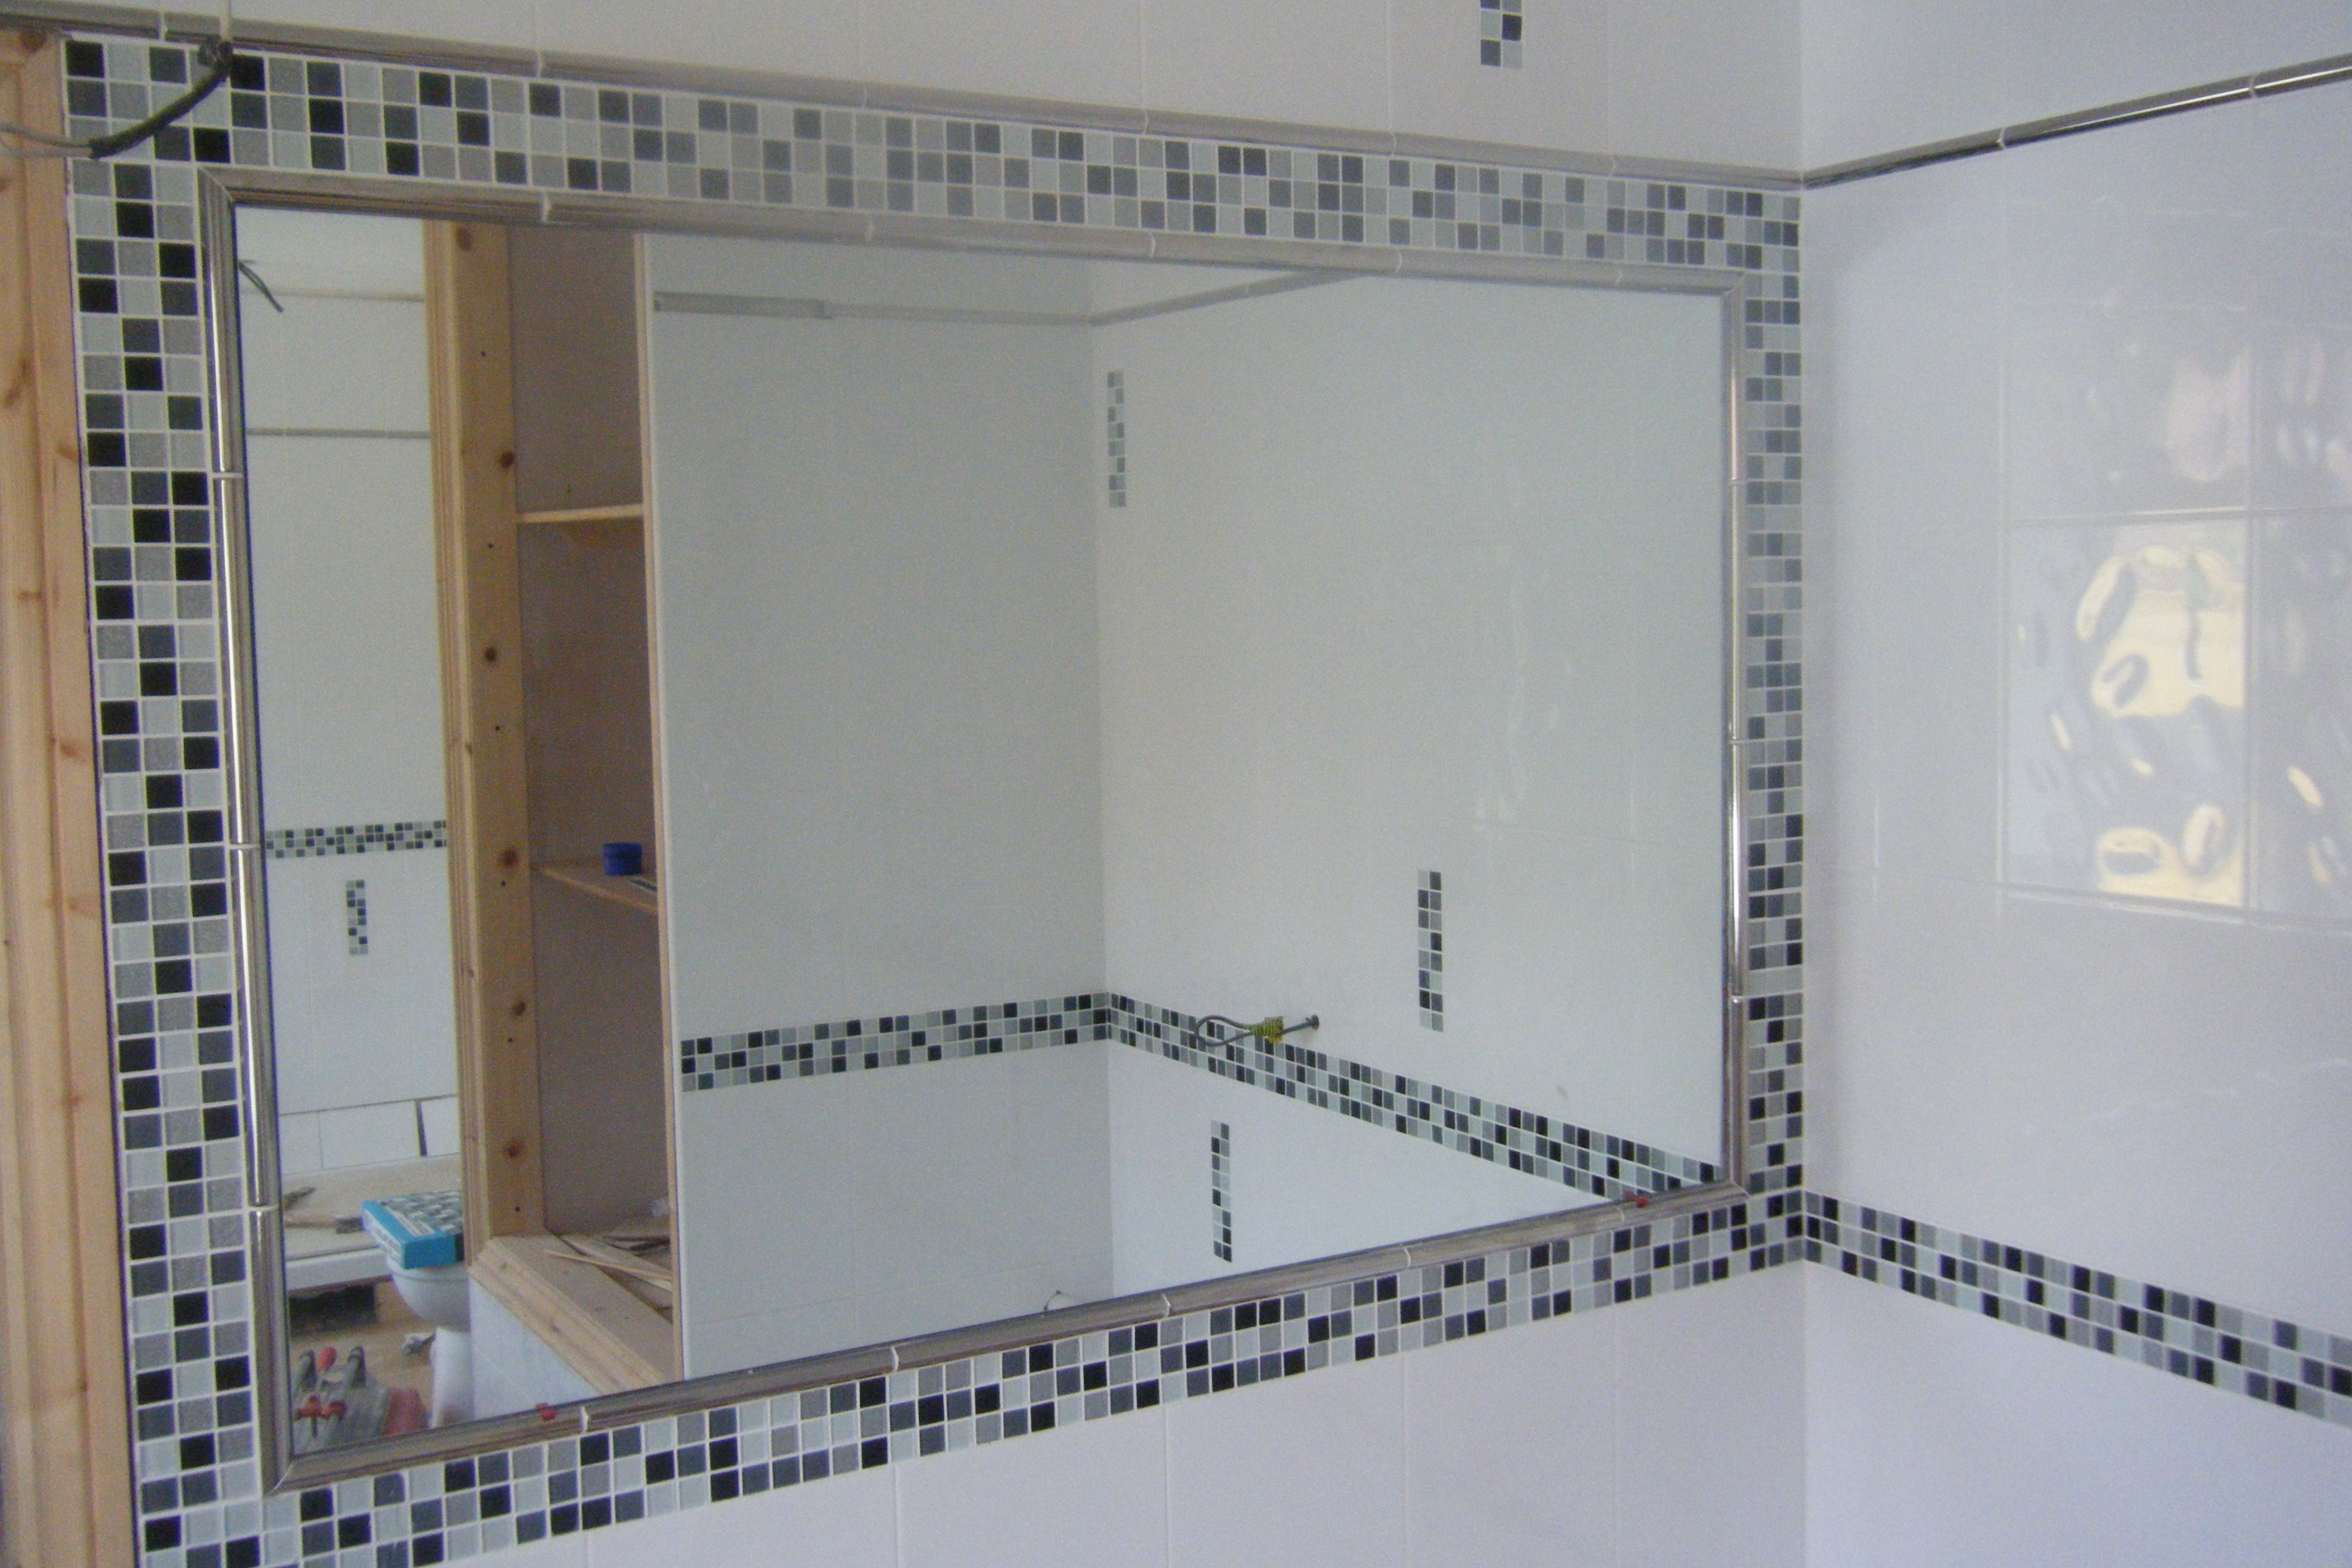 Mirror with mosaic tiled border feature